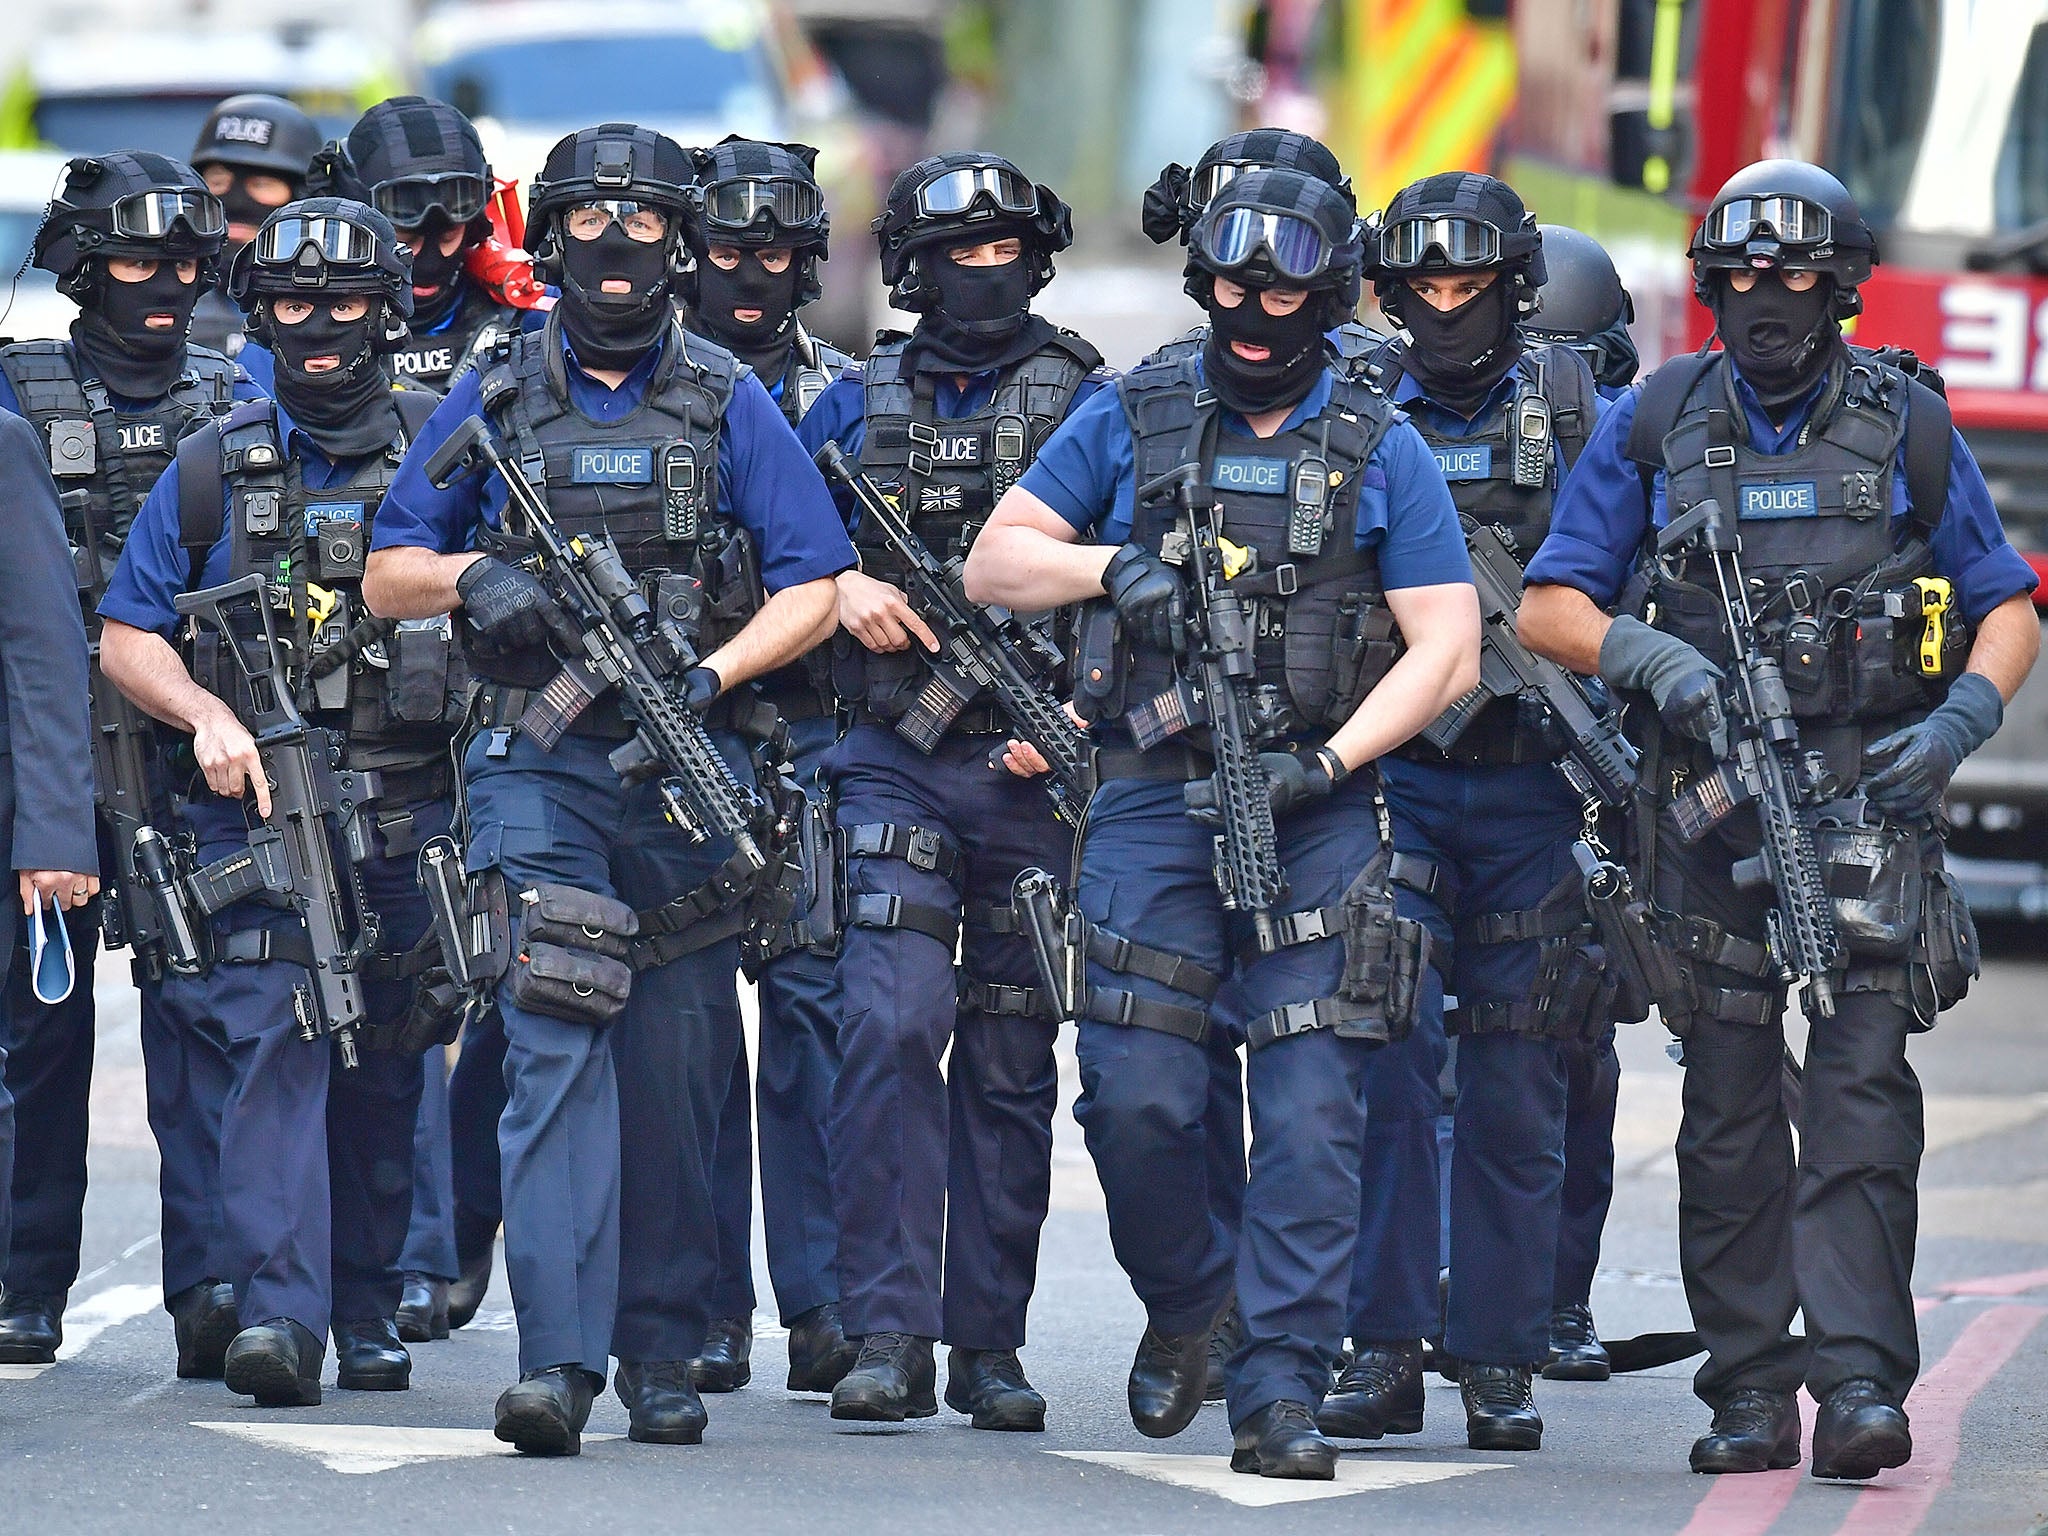 Armed police units are among those that have suffered cuts since 2010